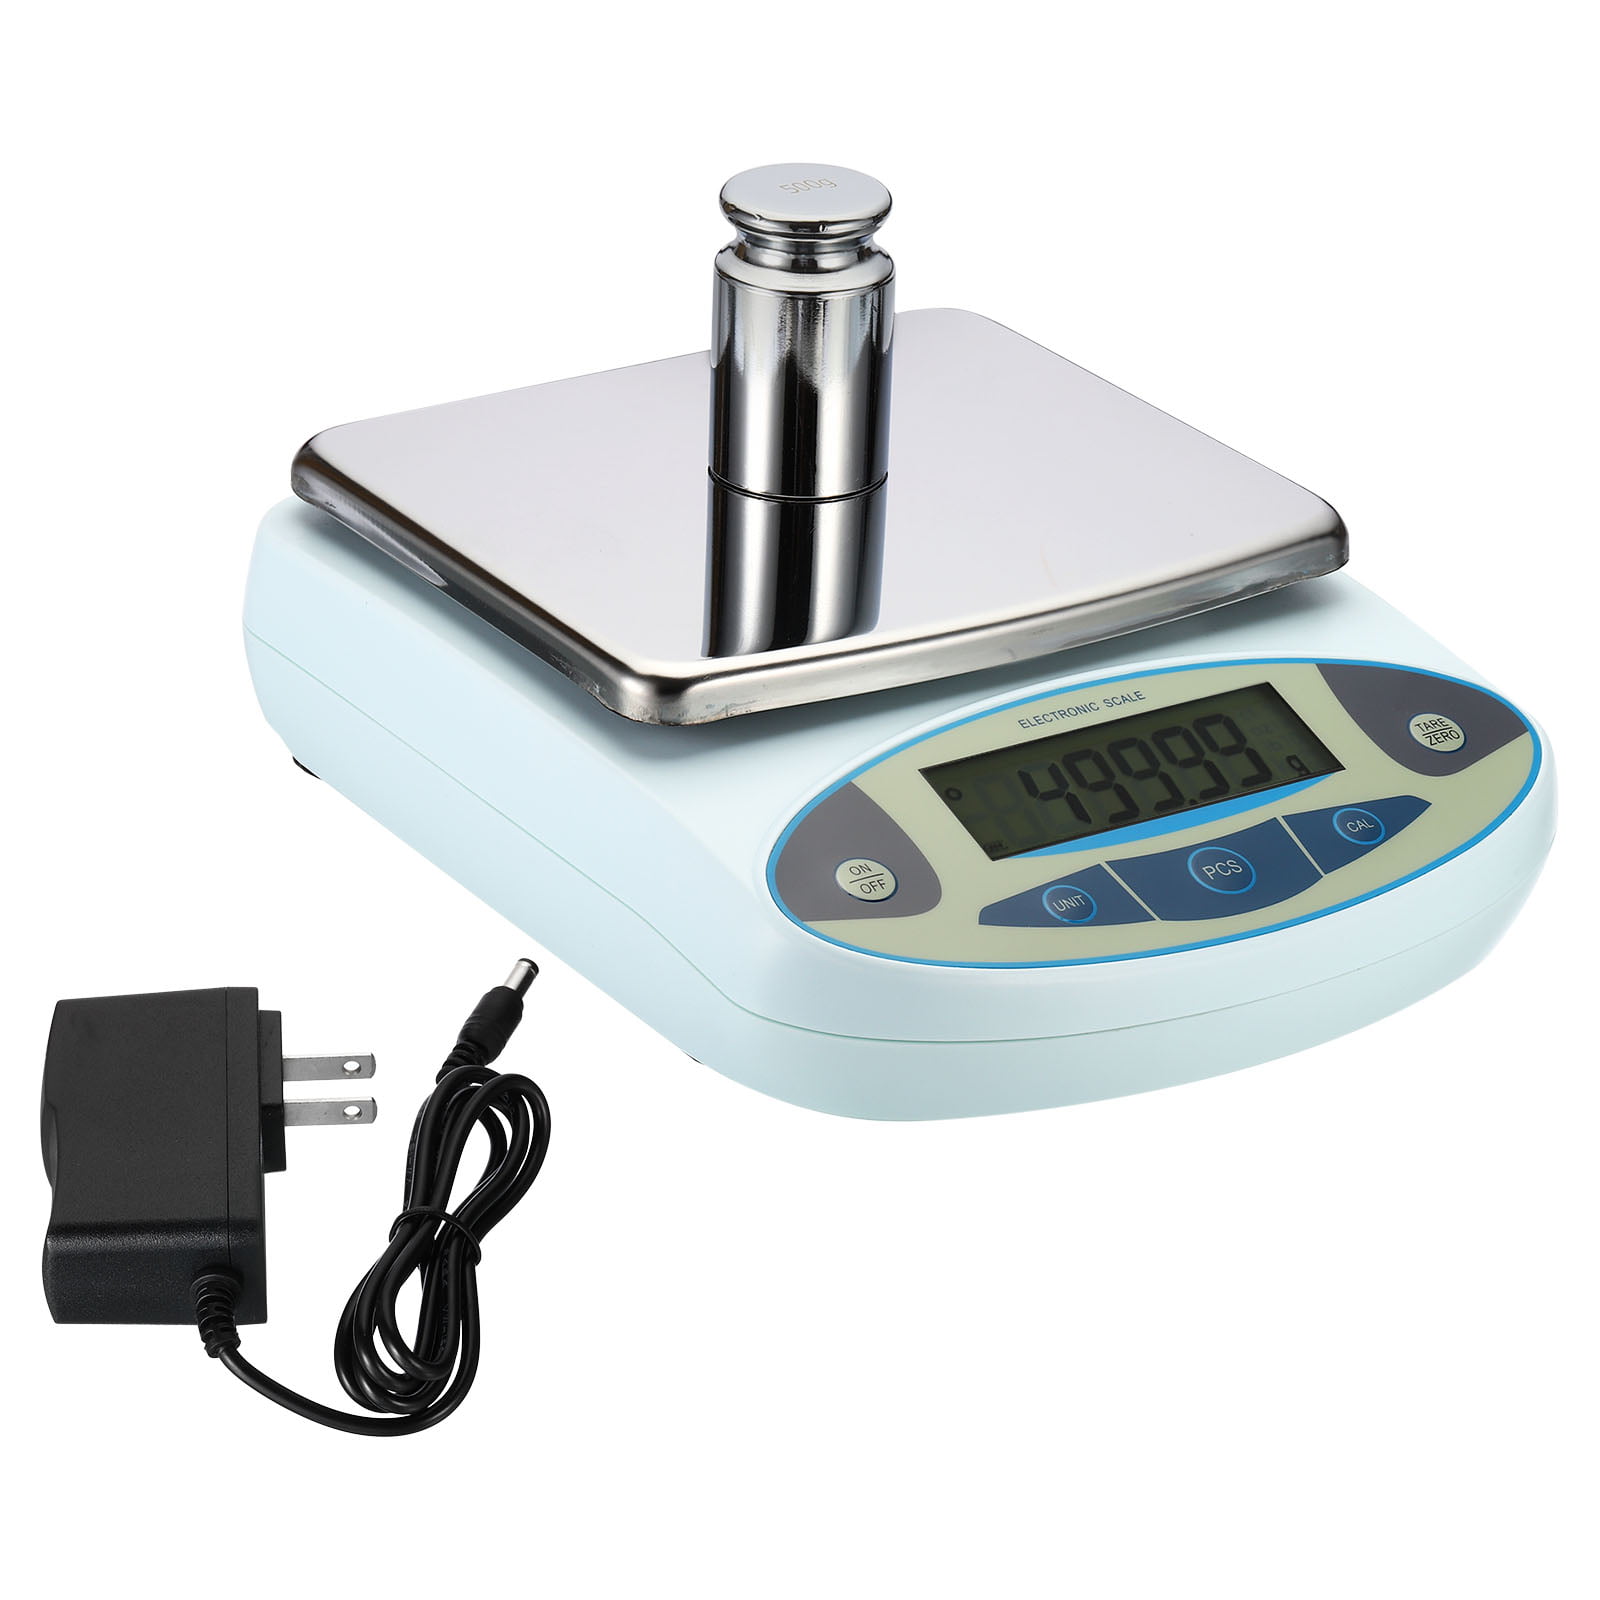 Laboratory balance weight - High accuracy tool - SCITEQ